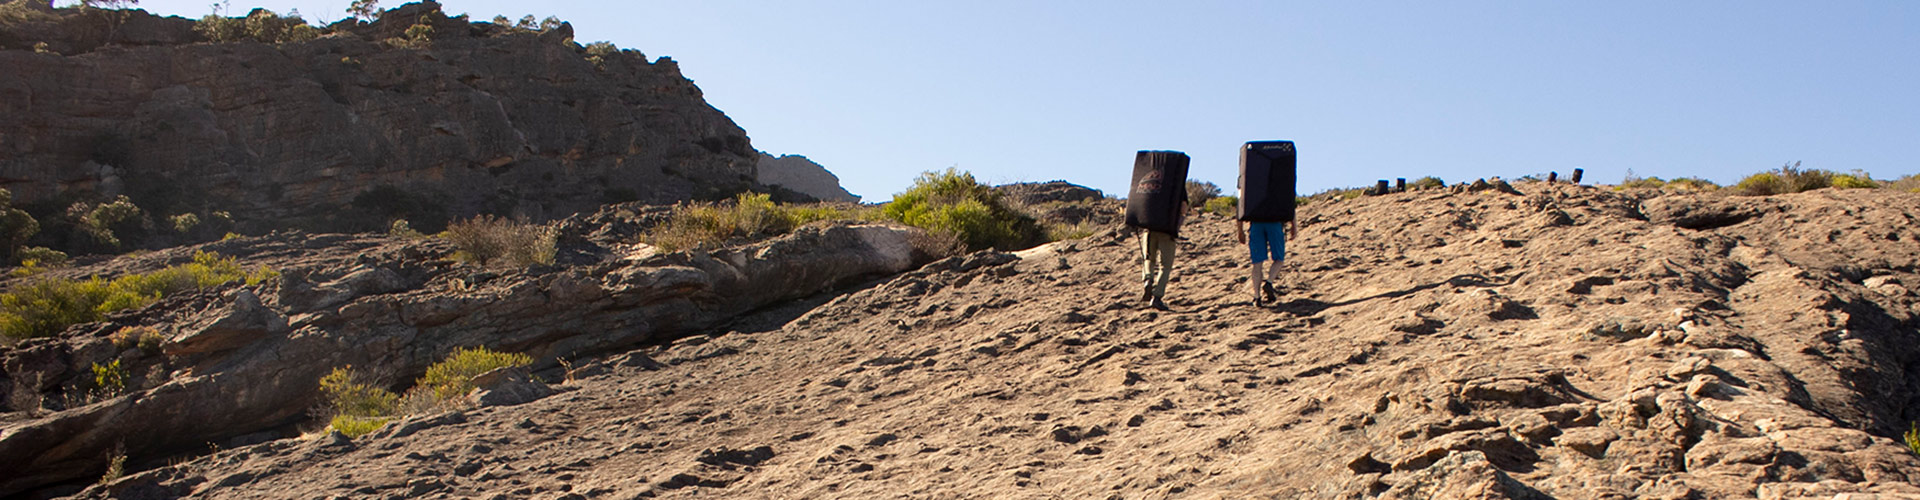 two people carrying bouldering matts on back